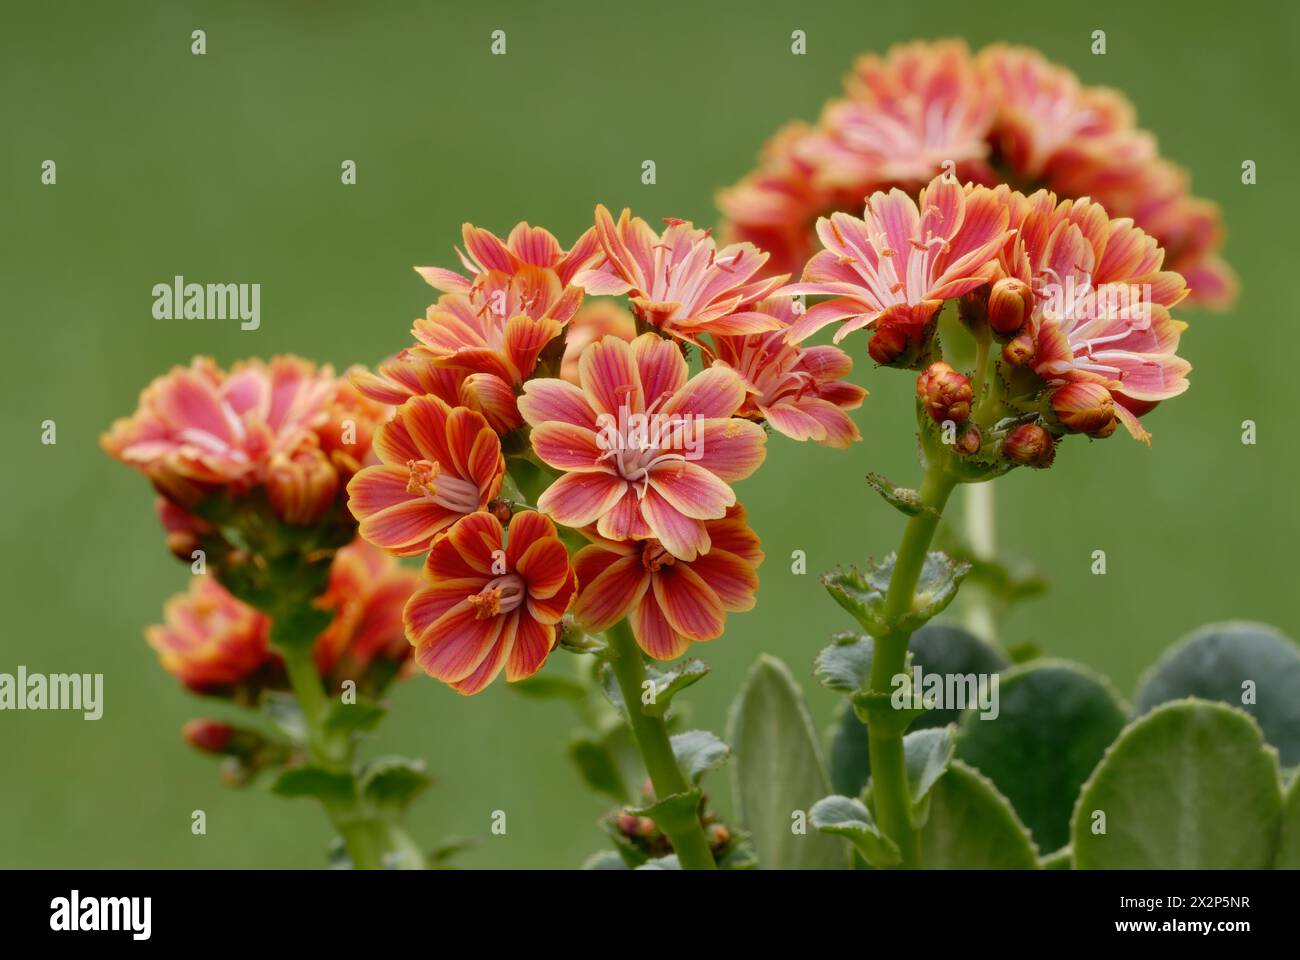 Lewisia Mountain Dreams flowers with buds, close up. Rock plant. Isolated on natural green background. Trencin, Slovakia Stock Photo